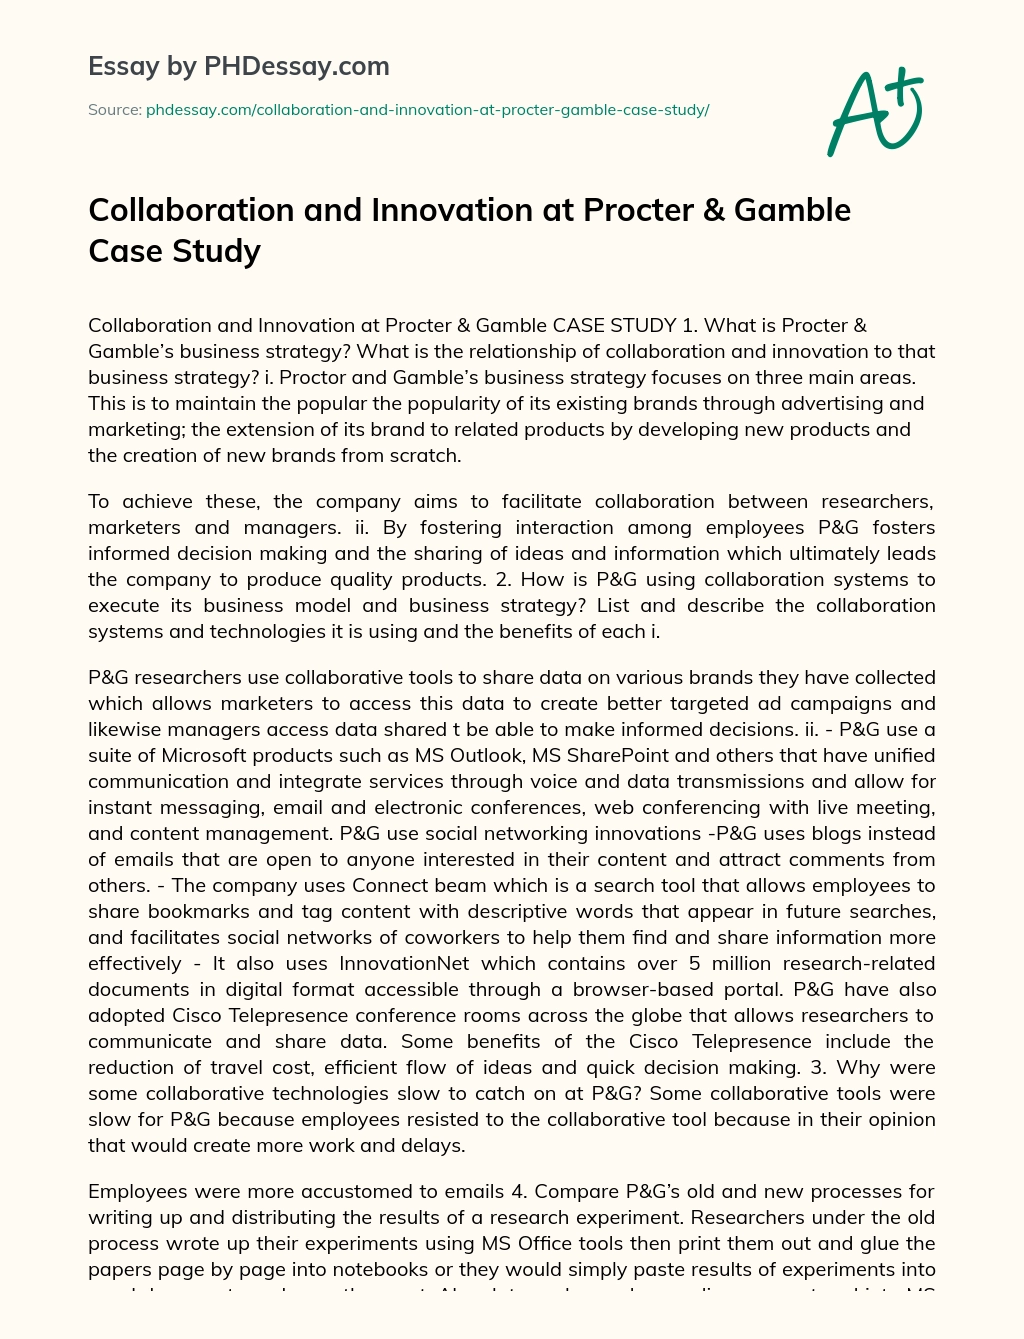 Collaboration and Innovation at Procter & Gamble Case Study essay